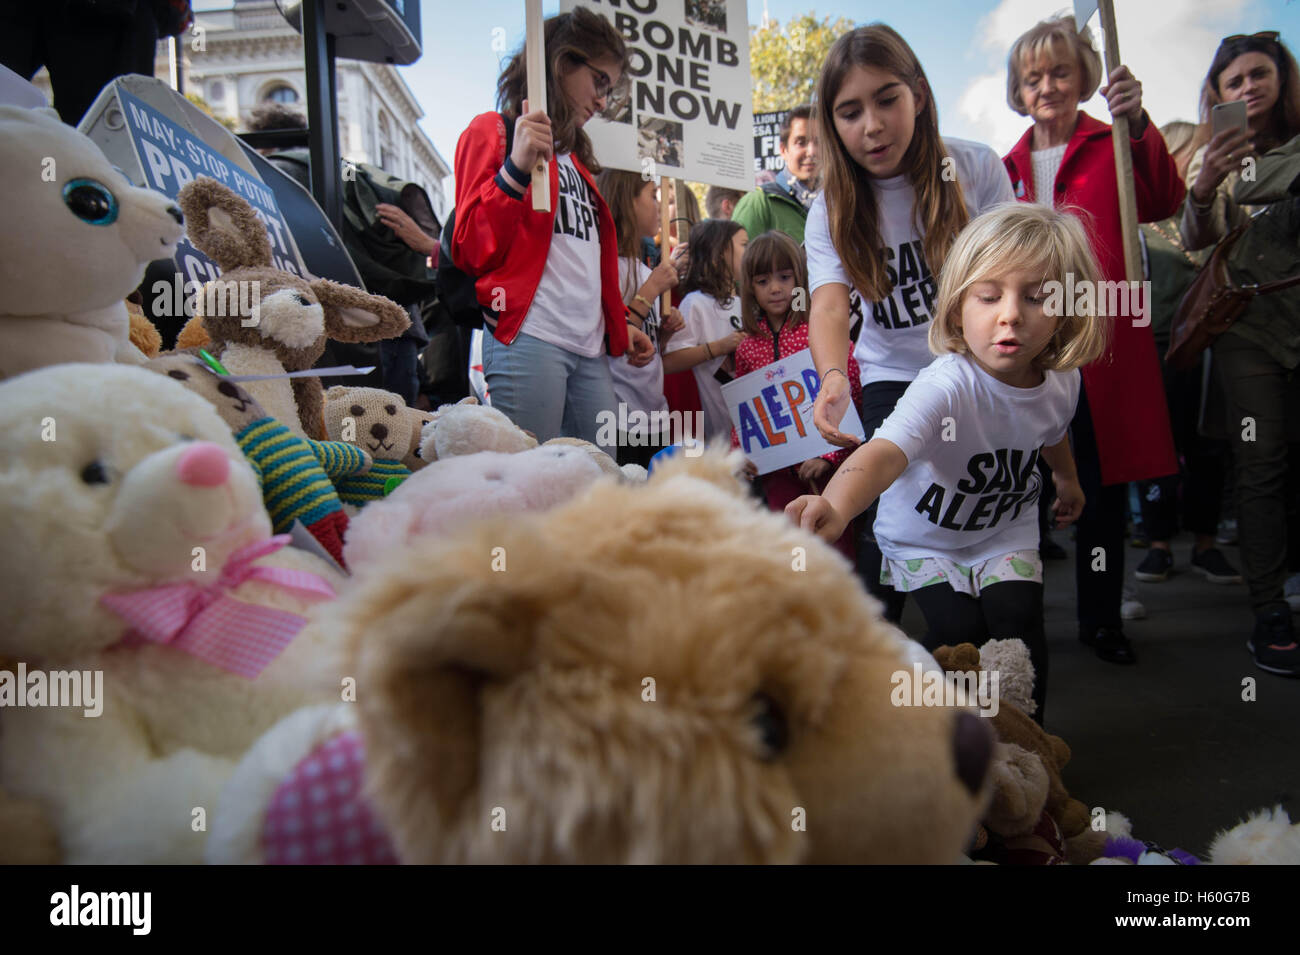 Children join demonstrators in laying teddy bears outside the gates of Downing Street in central London during a protest to highlight the high numbers of children killed in bombings in Syria and to demand the Government intervene over Russian and Syrian bombing campaigns. Stock Photo